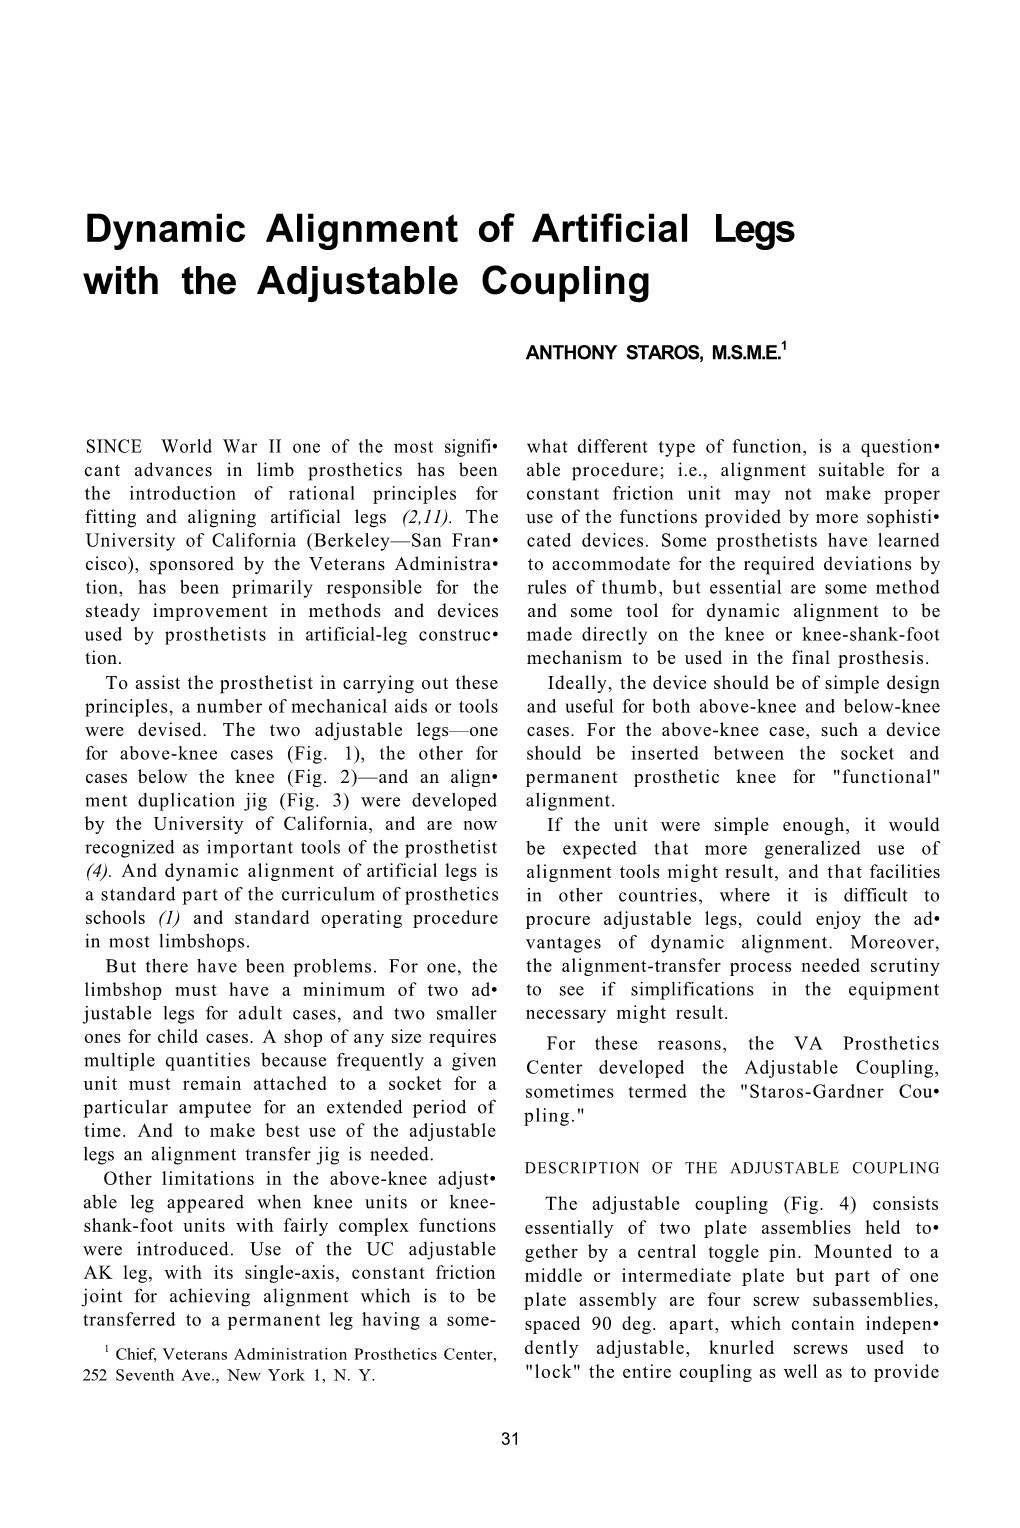 Dynamic Alignment of Artificial Legs with the Adjustable Coupling